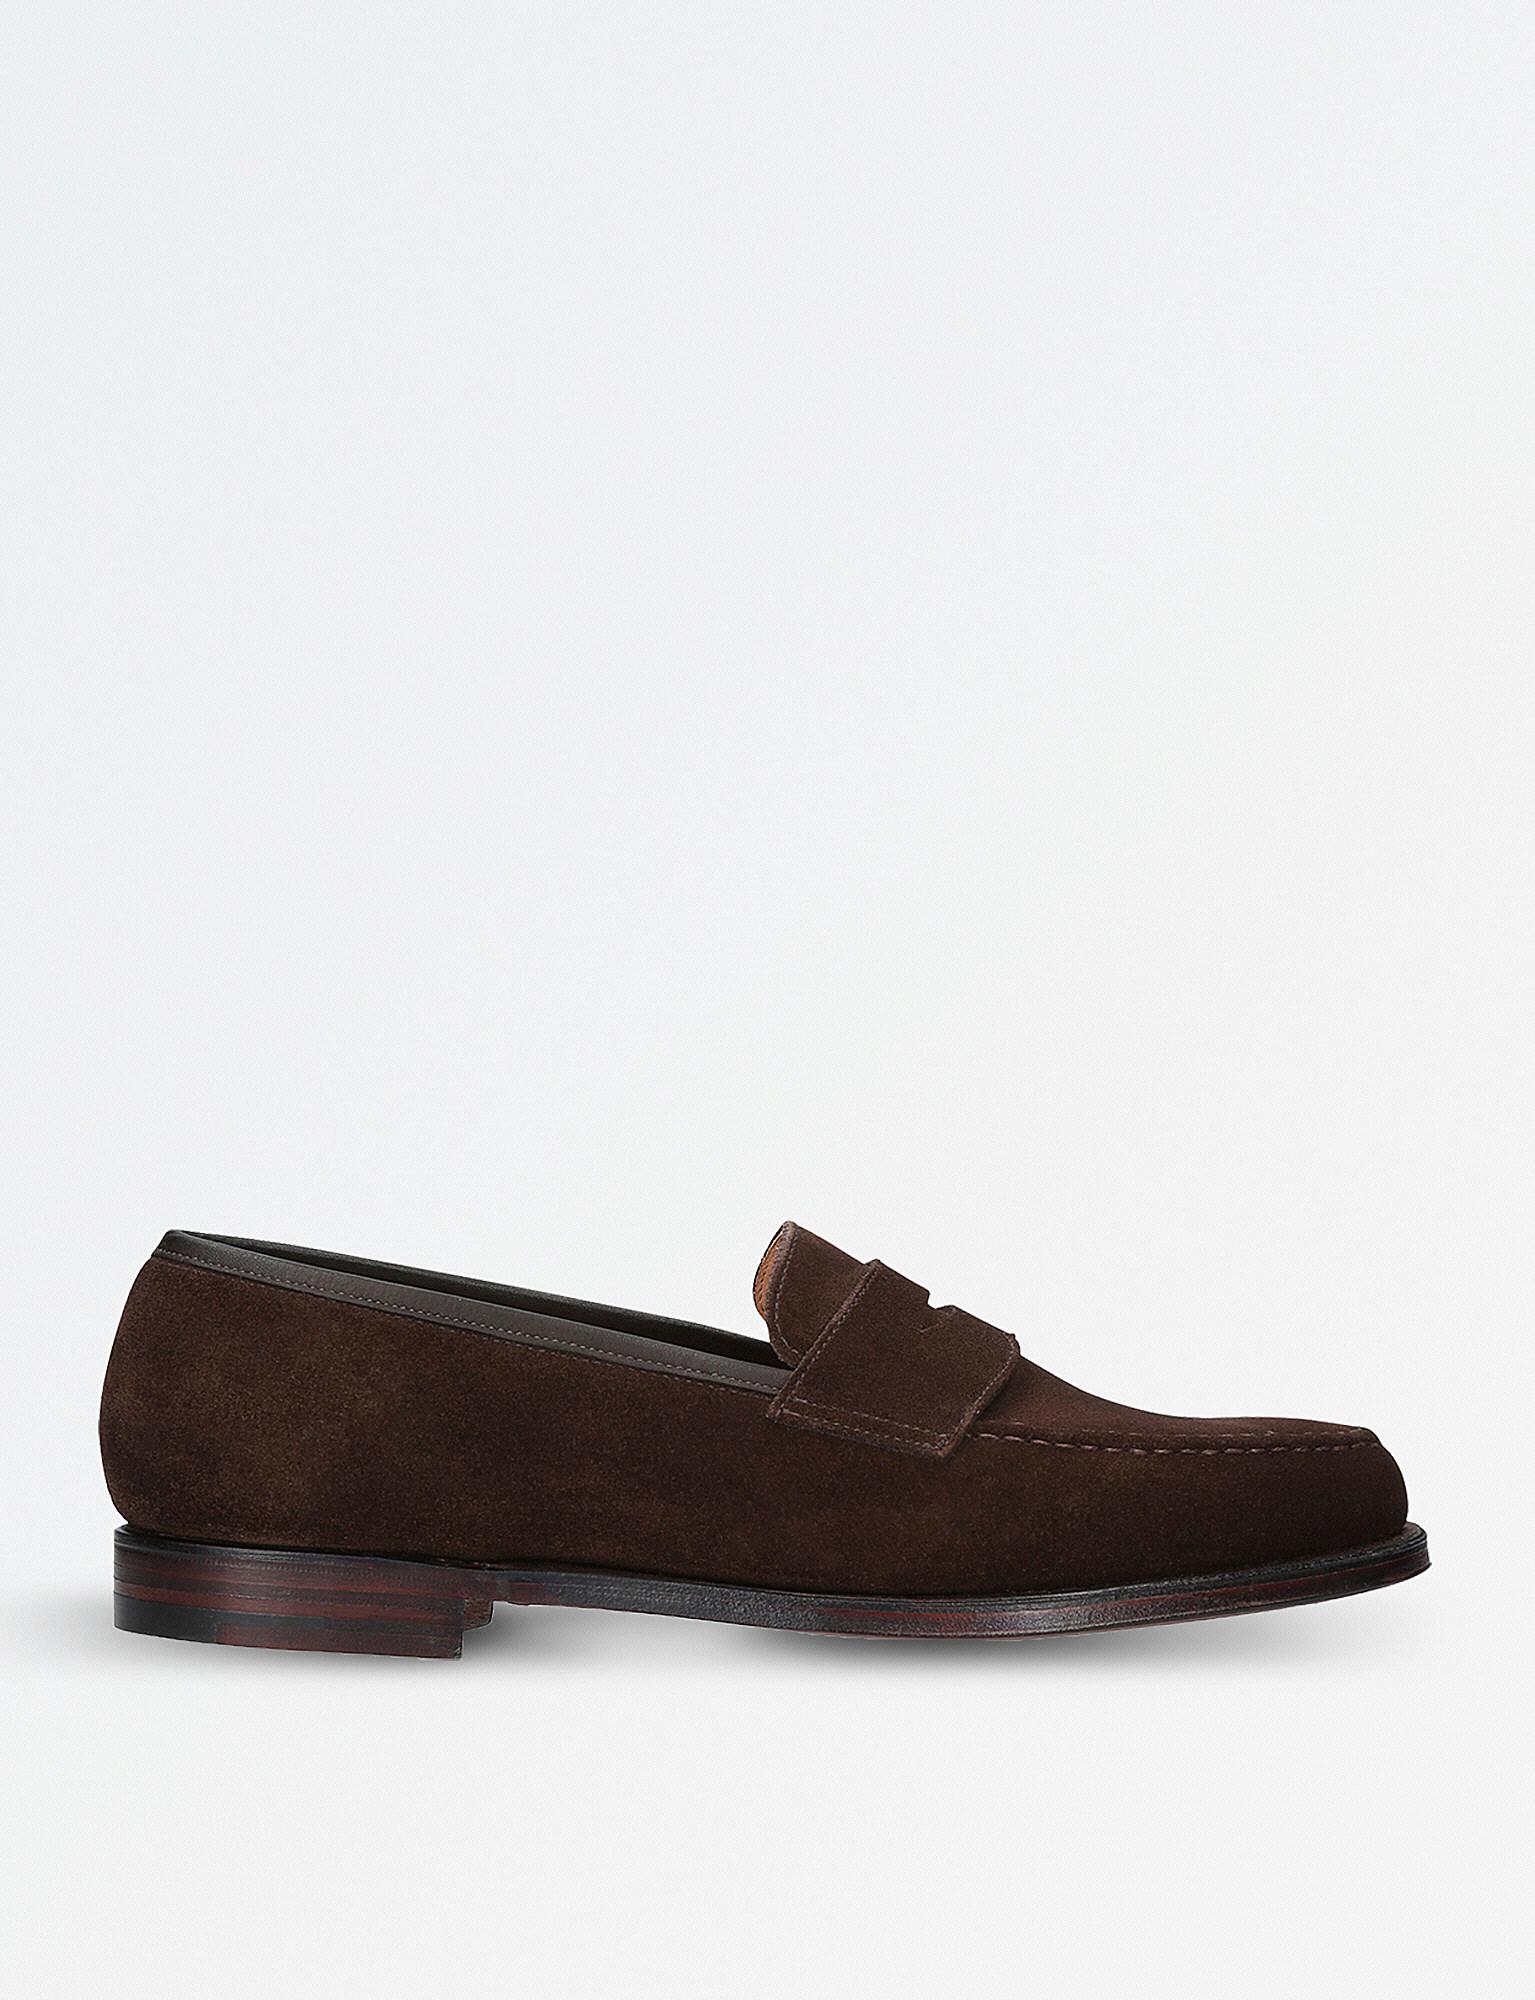 Crockett and Jones Boston Suede Penny Loafers in Brown for Men - Lyst